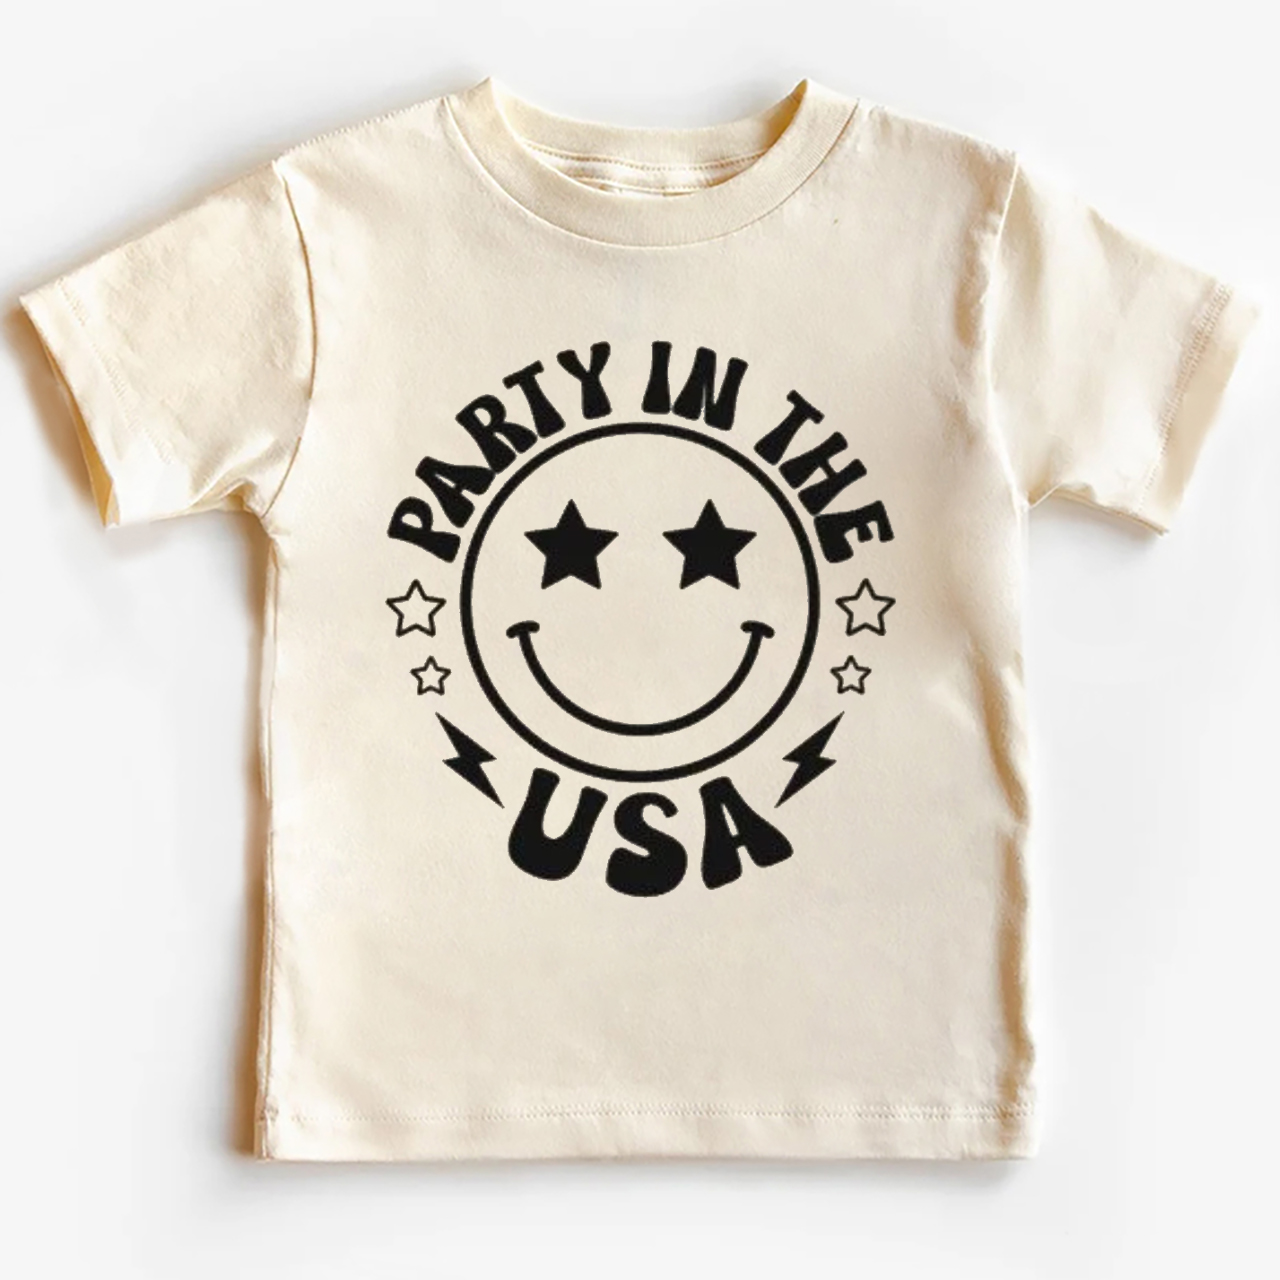 Party In The USA Smiley Face Toddler Shirt